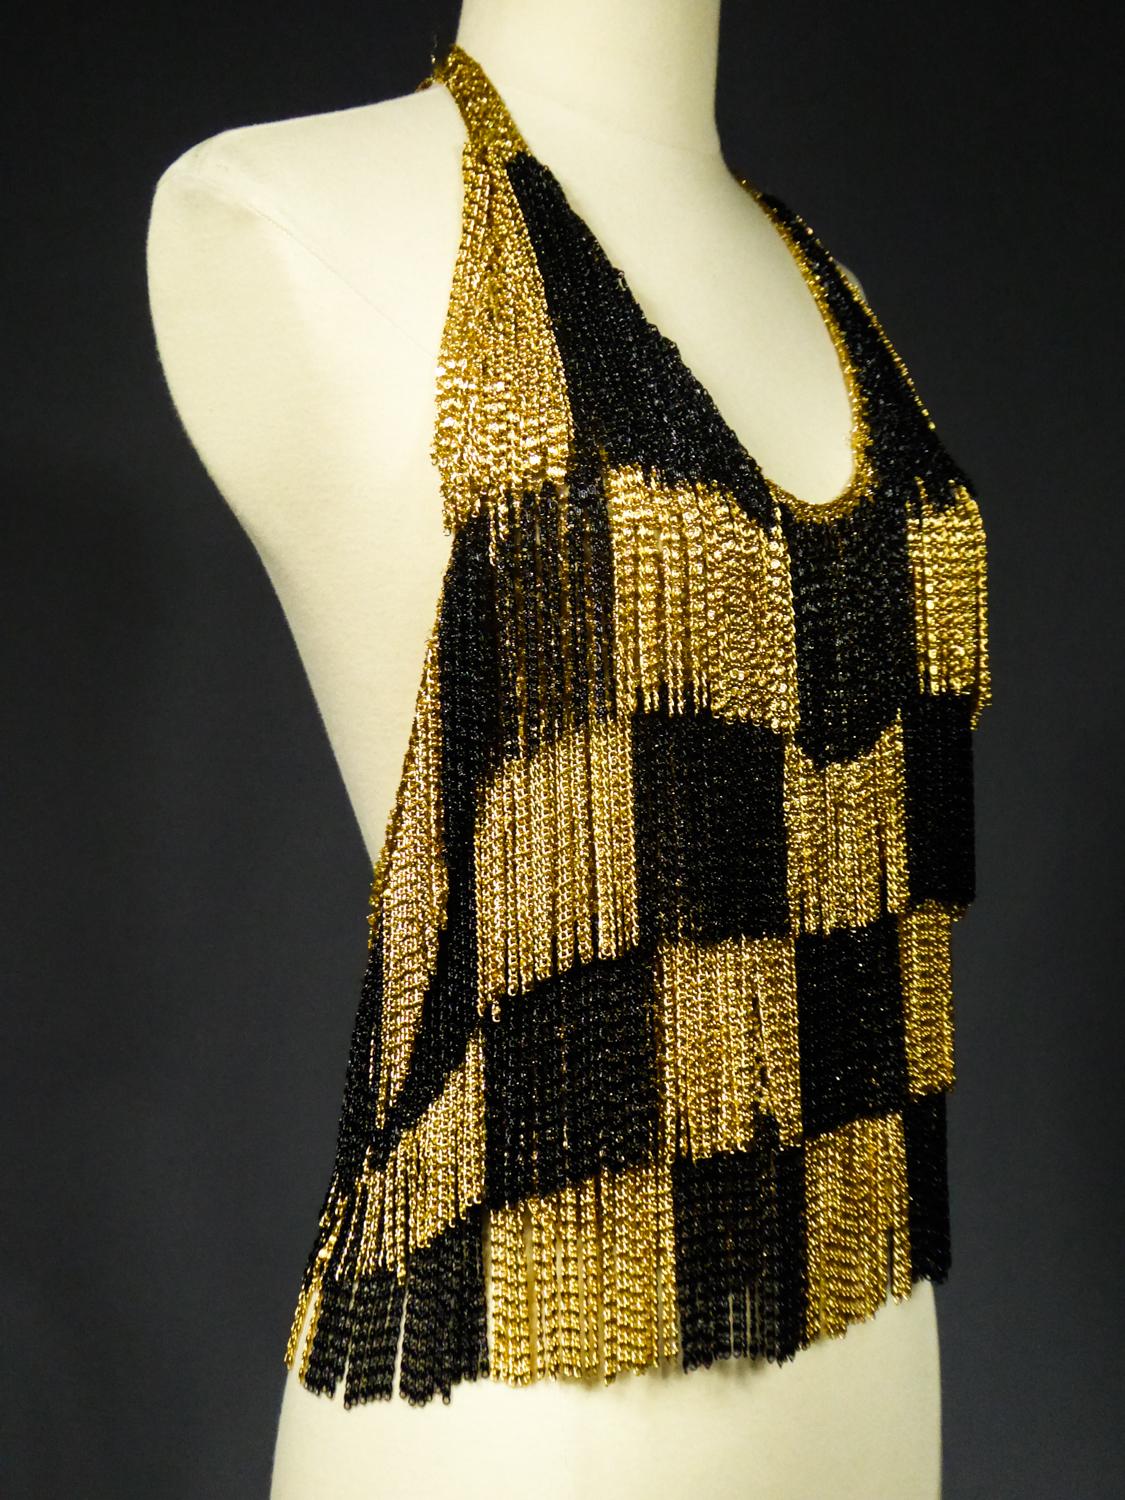 Women's A Loris Azzaro French Couture Top in Lurex Circa 1970 For Sale